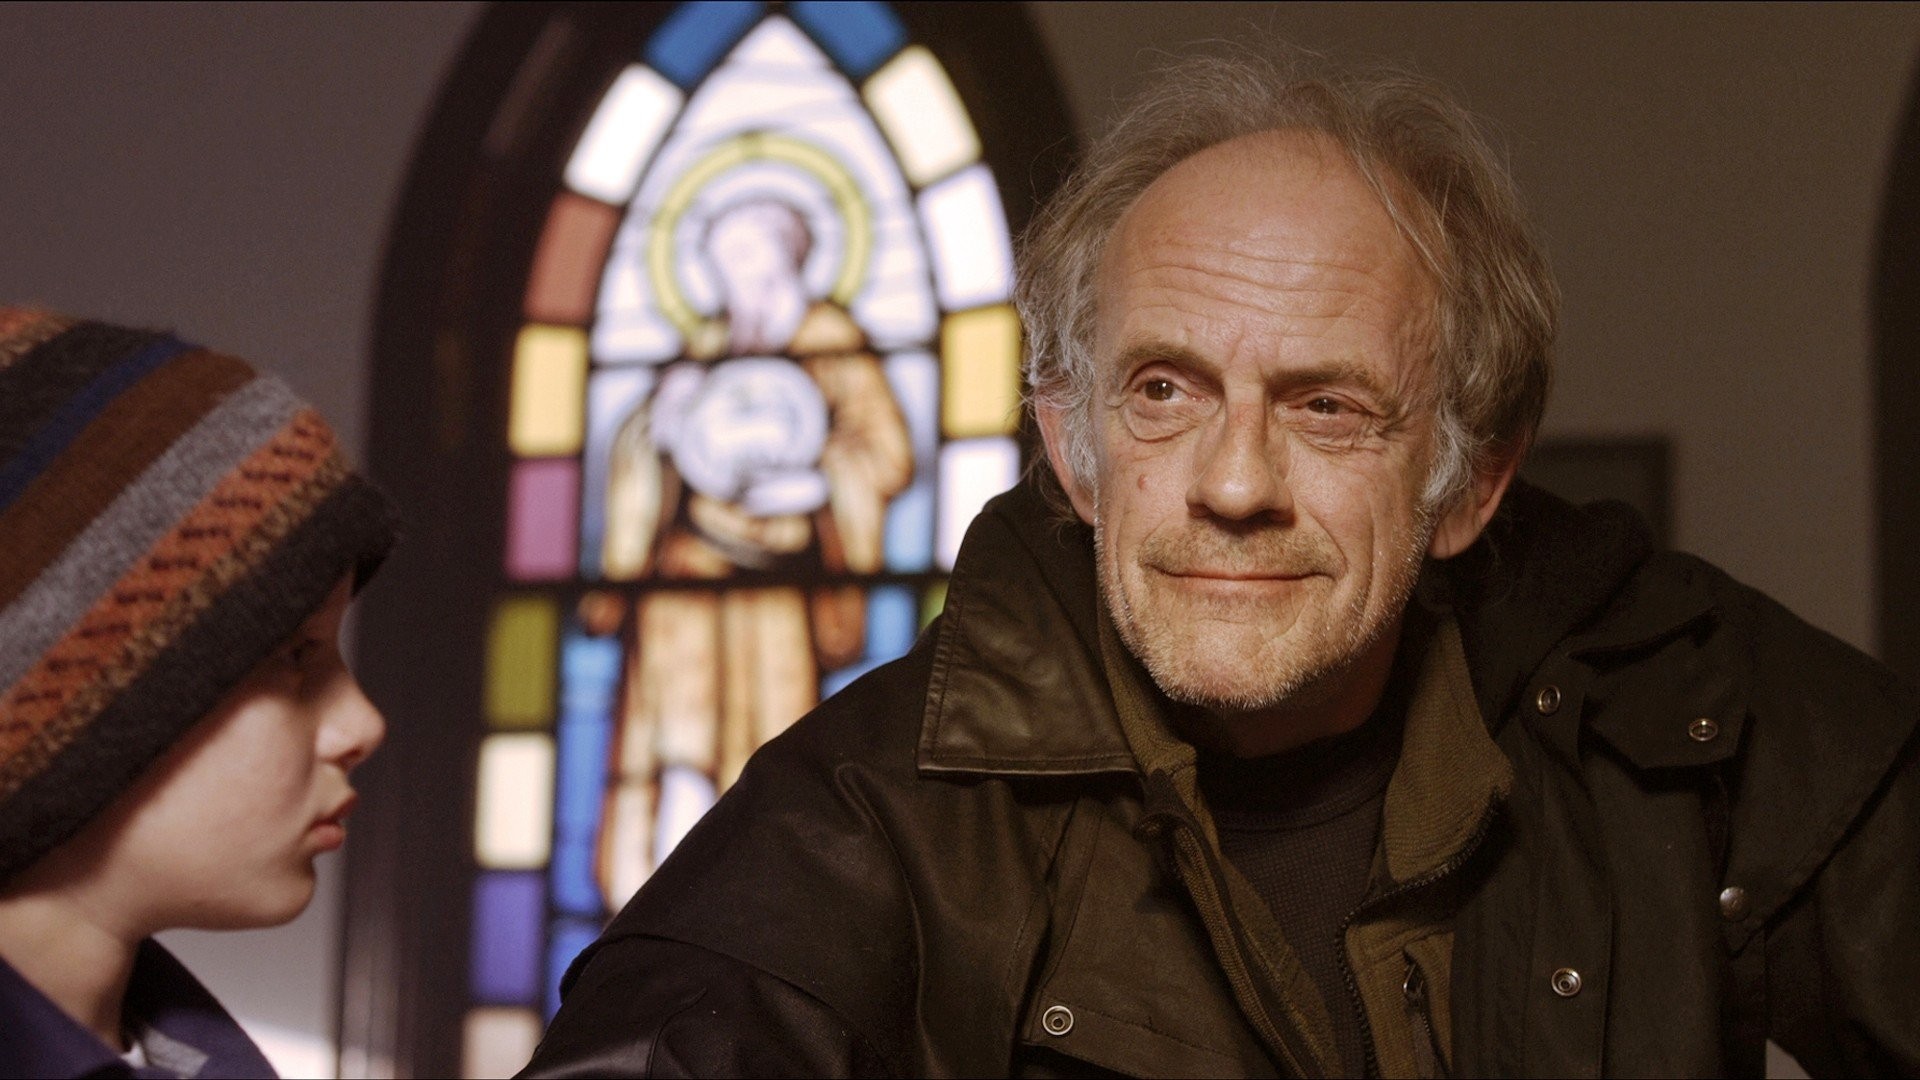 Bobby Coleman stars as Billy Kirkfield and Christopher Lloyd stars as The Caretaker in ARC Entertainment's Snowmen (2011)